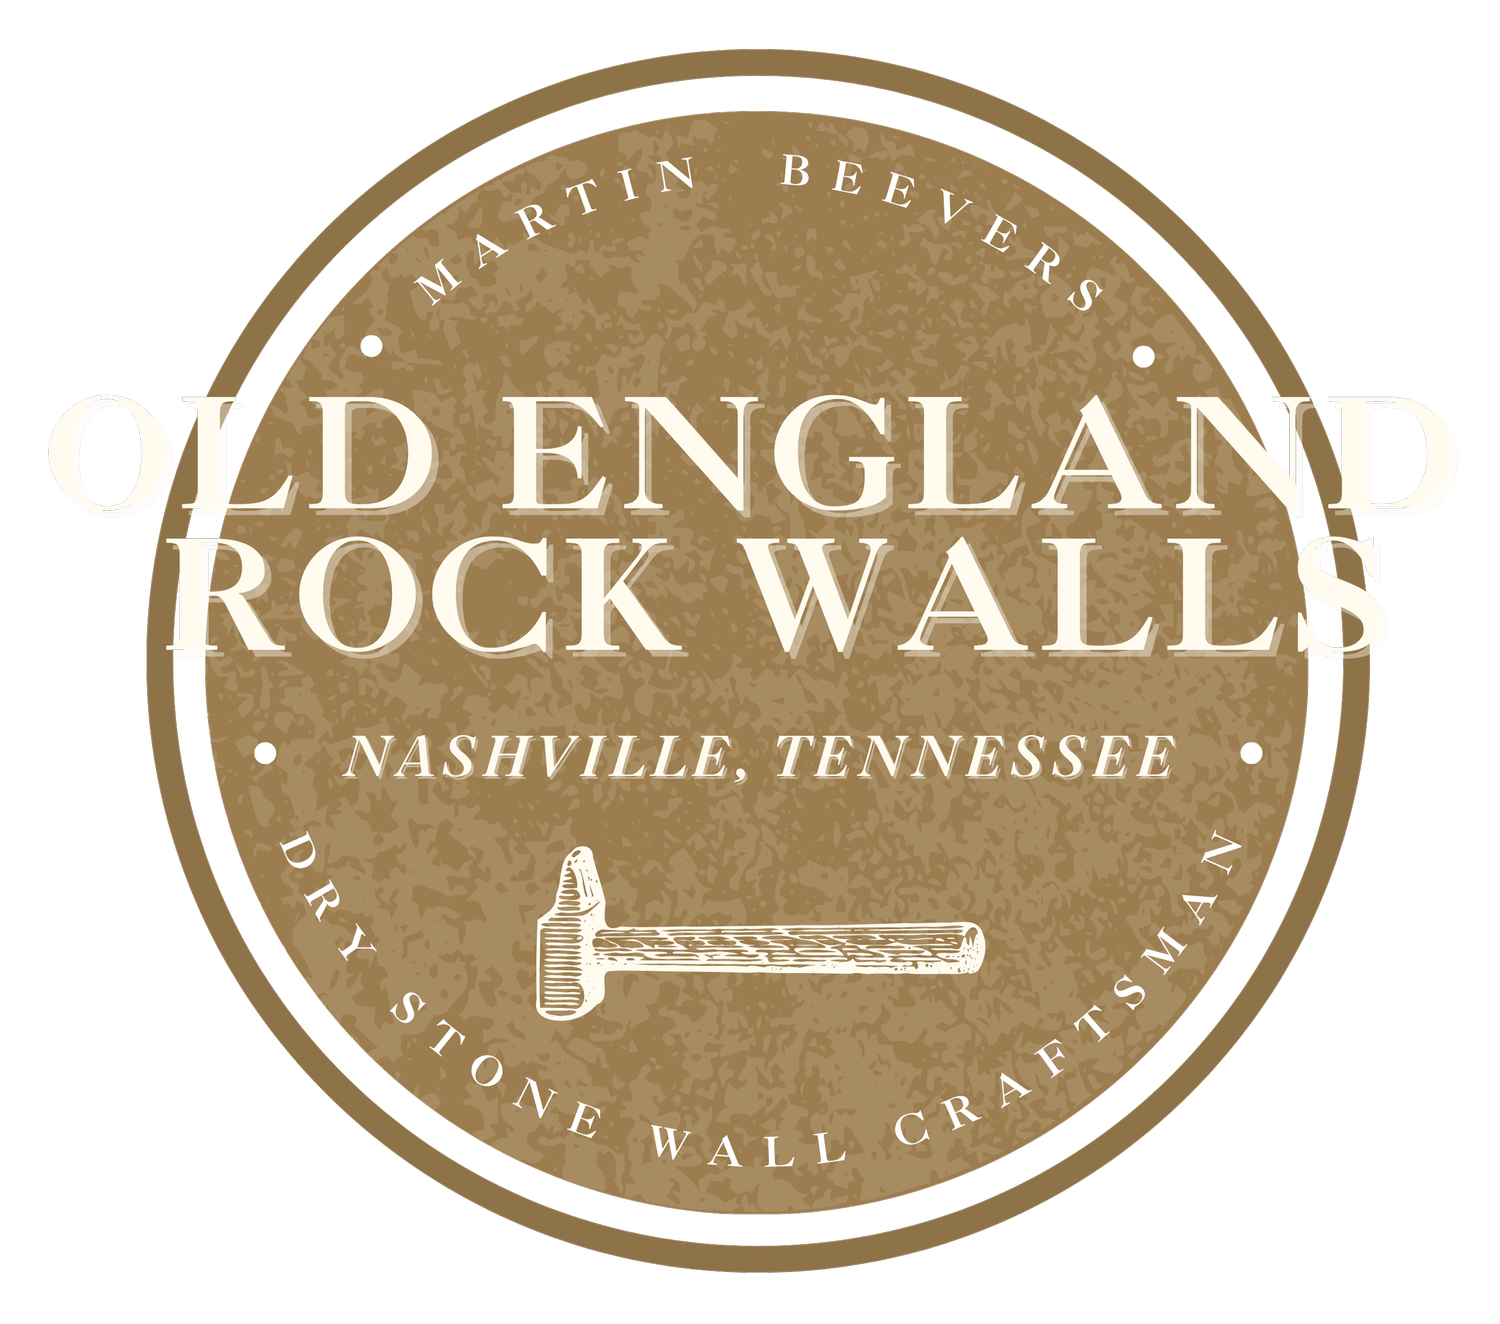 Old English Rock Walls by Martin Beevers | Dry-Stone Walling Specialists | Nashville, Tennessee 